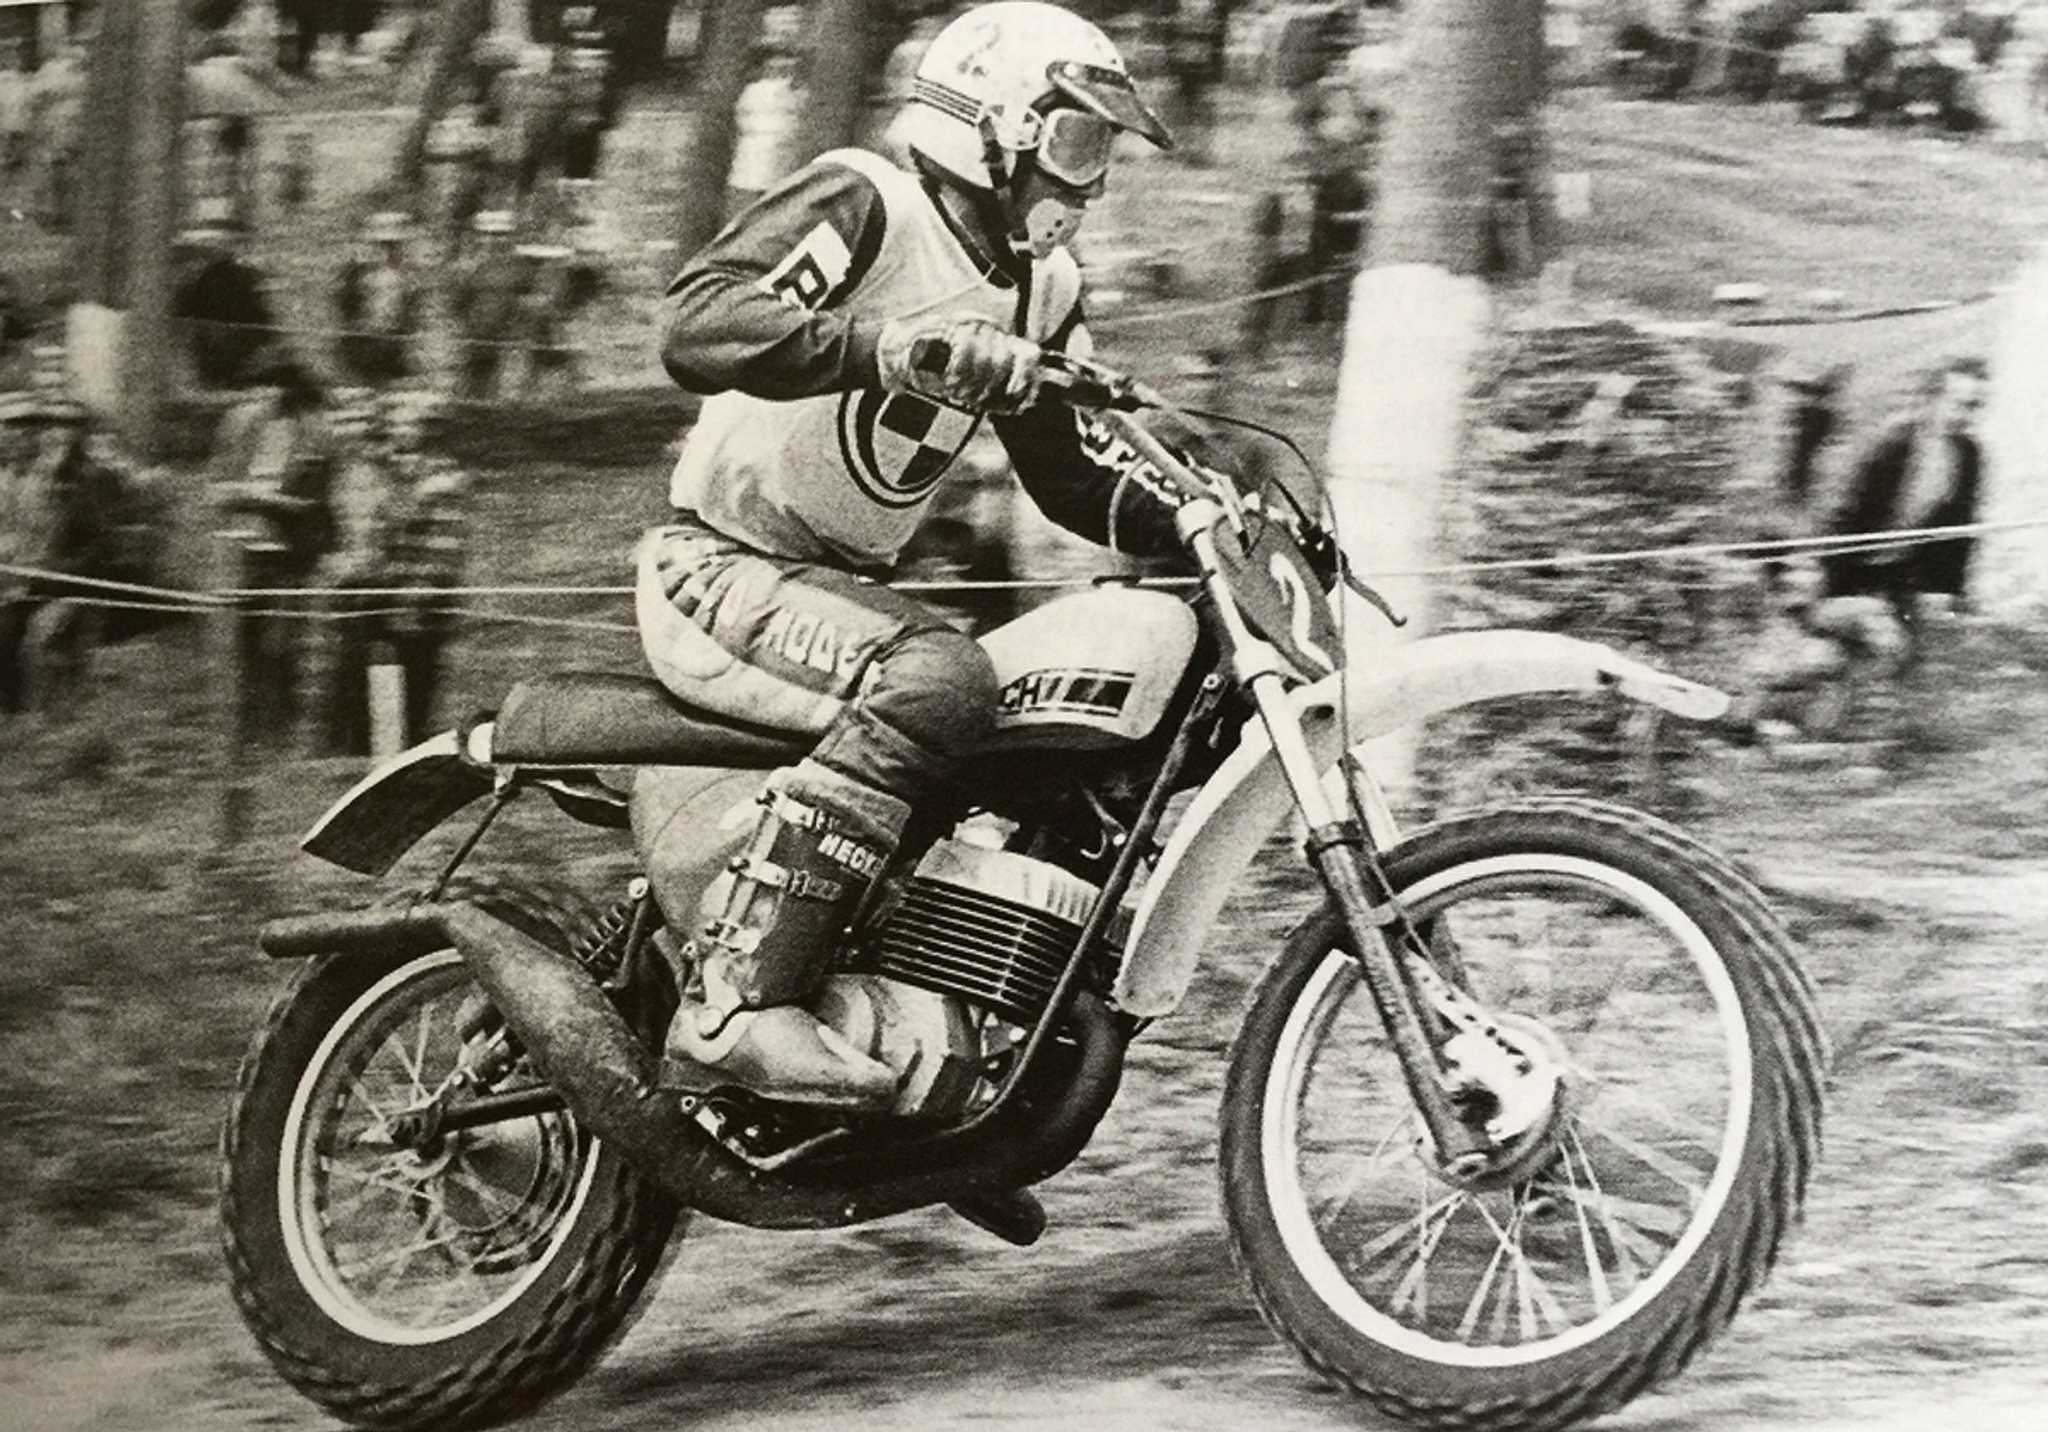 Everts Wins in Spain - 1975 image